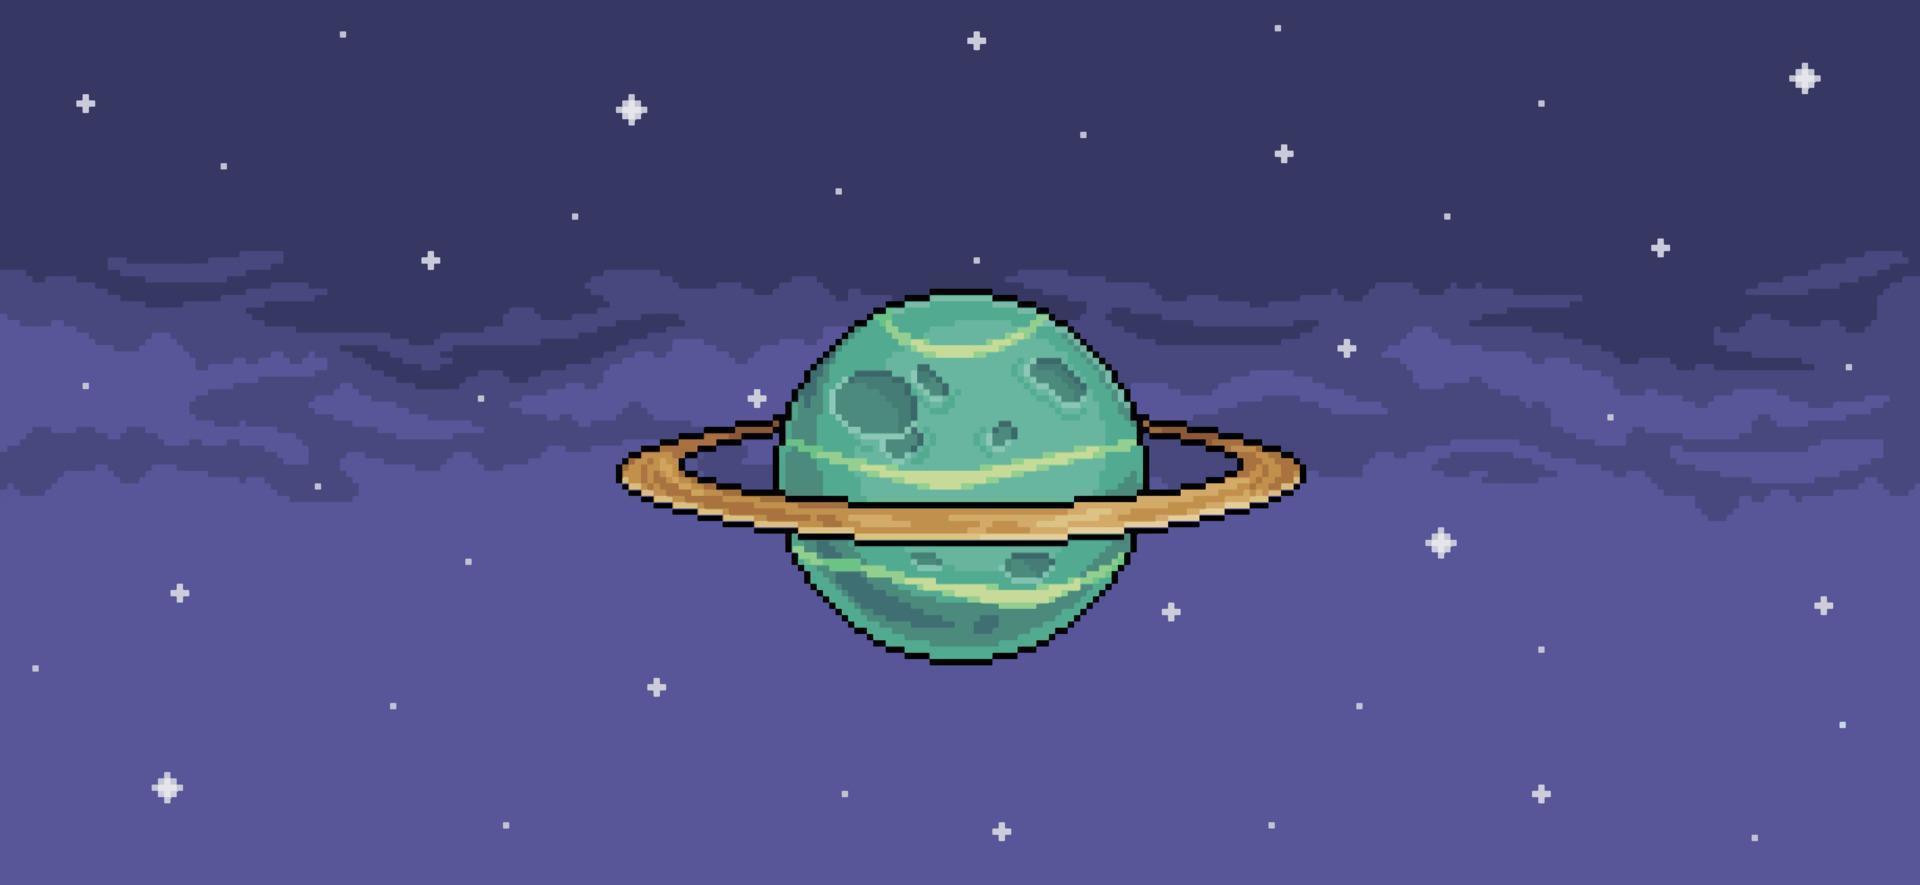 Pixel art background of planet with rings in space. Vector scene for 8bit game